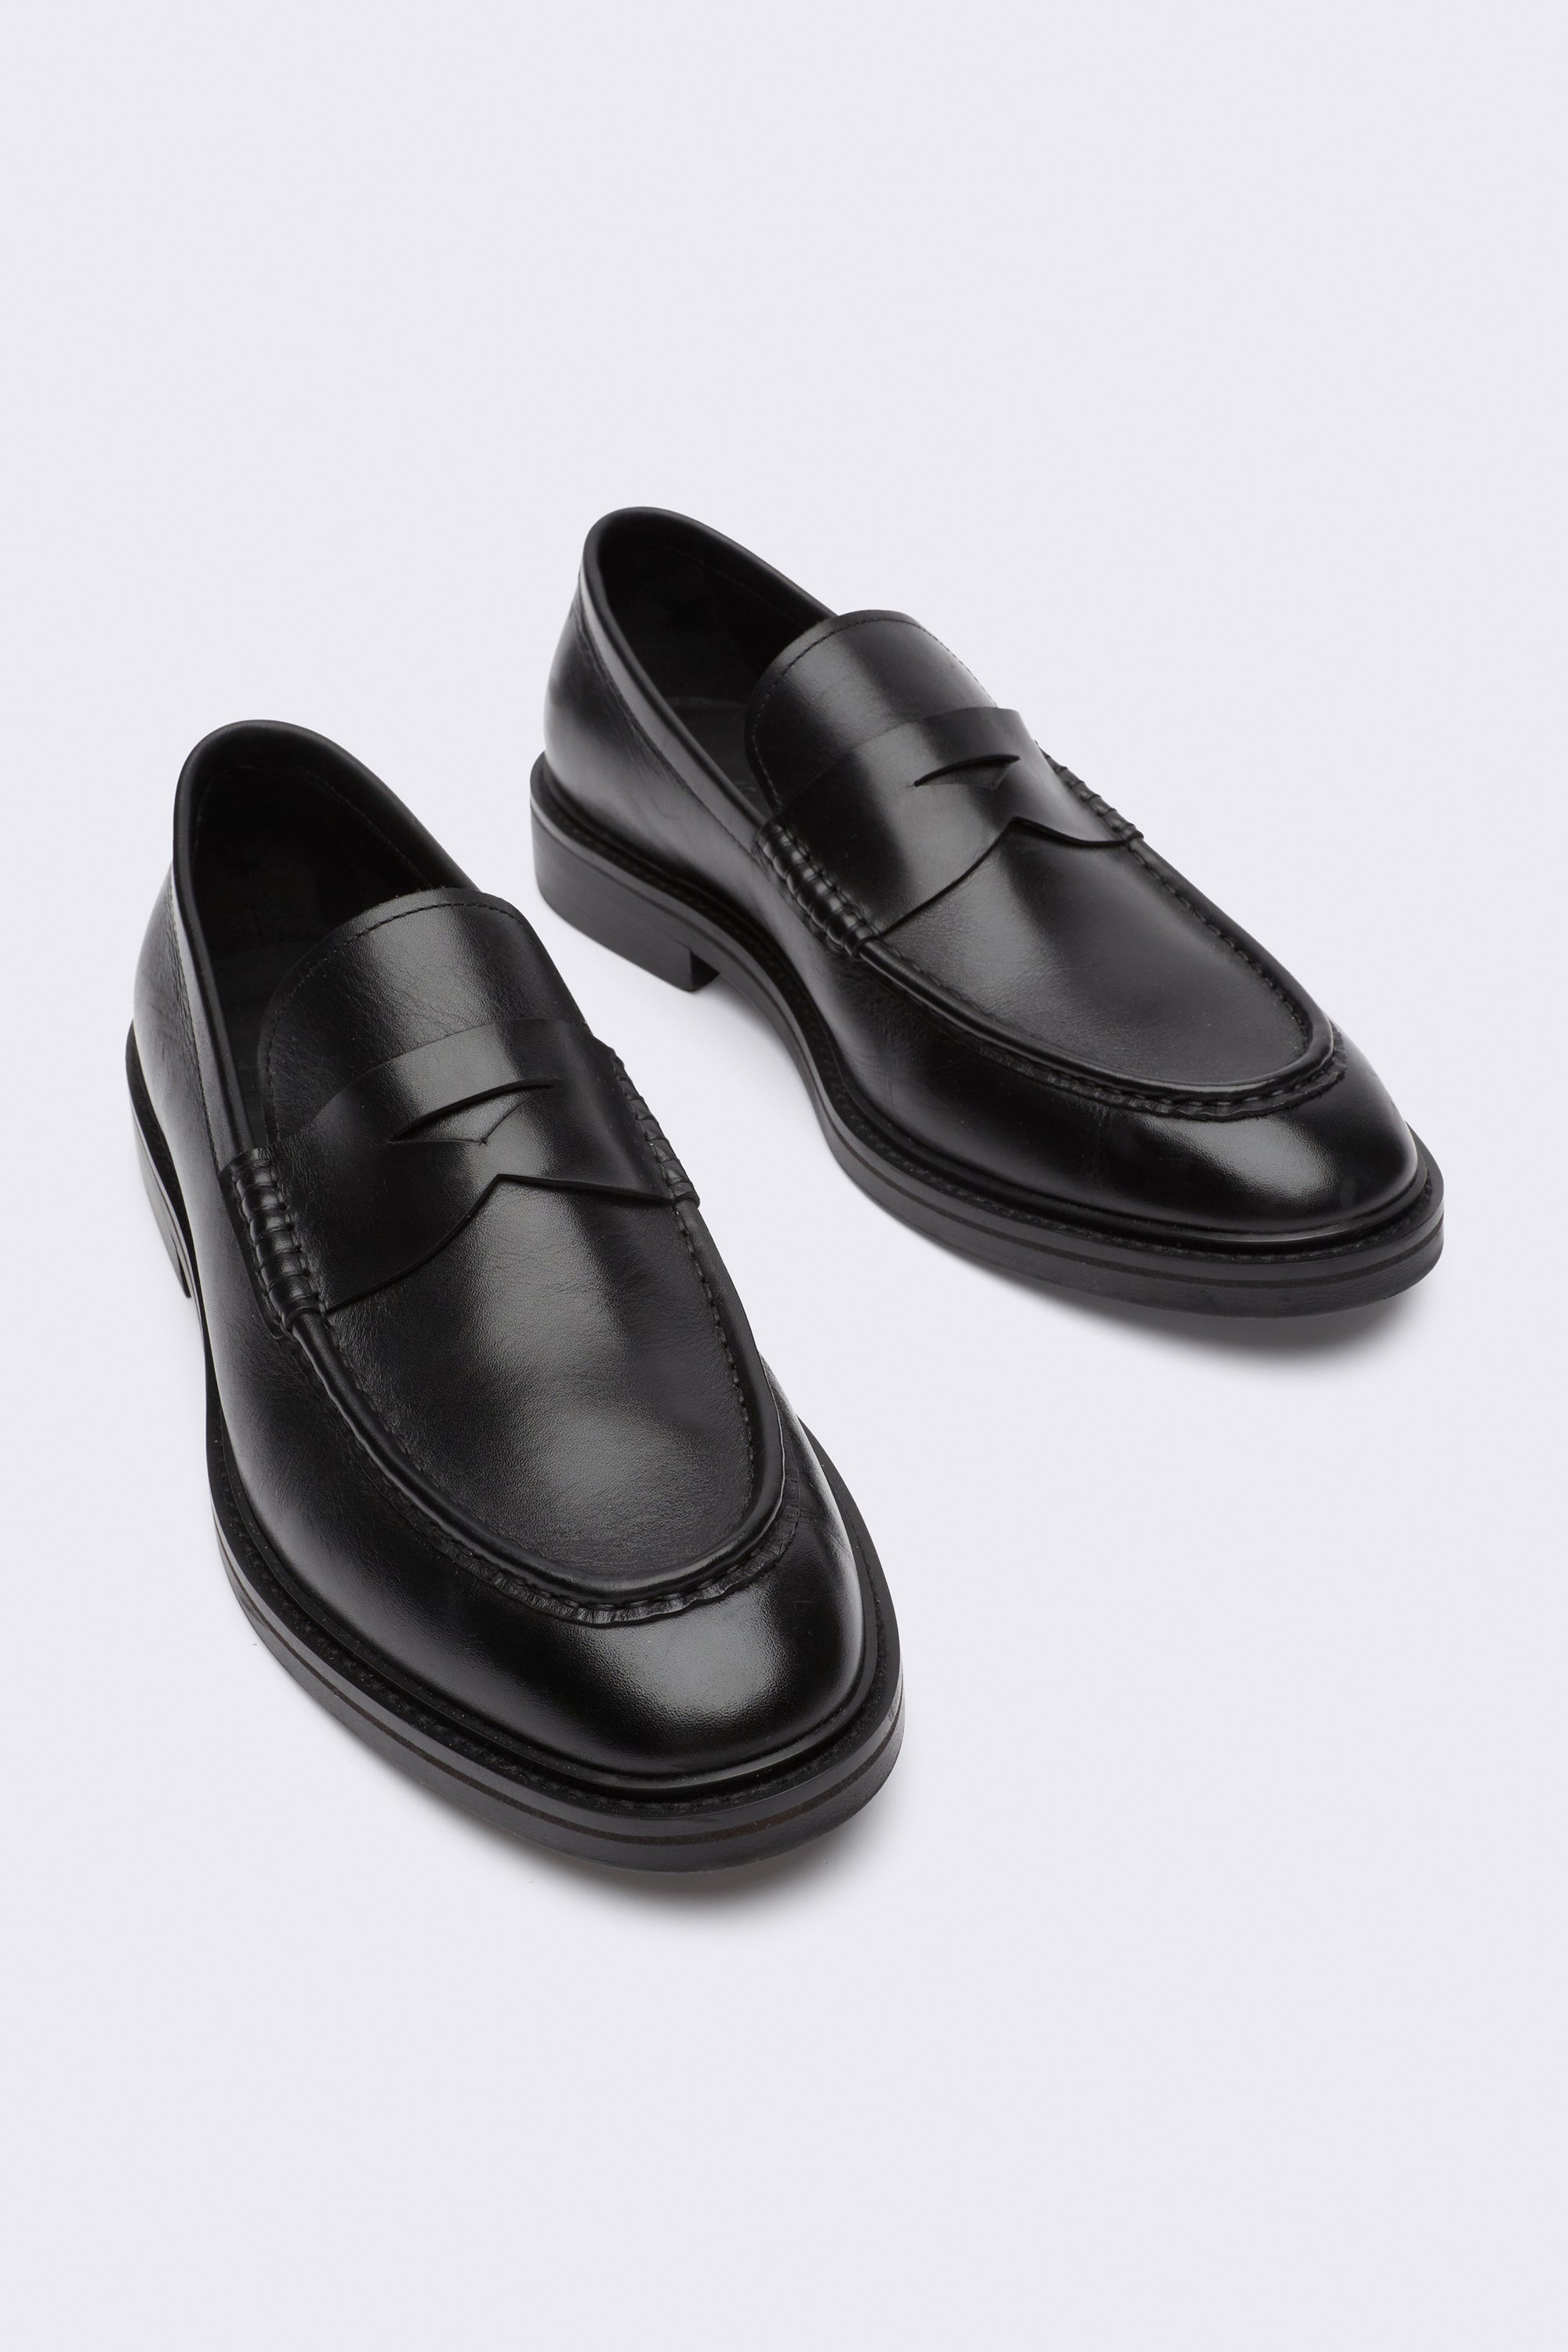 Boston Leather Loafer